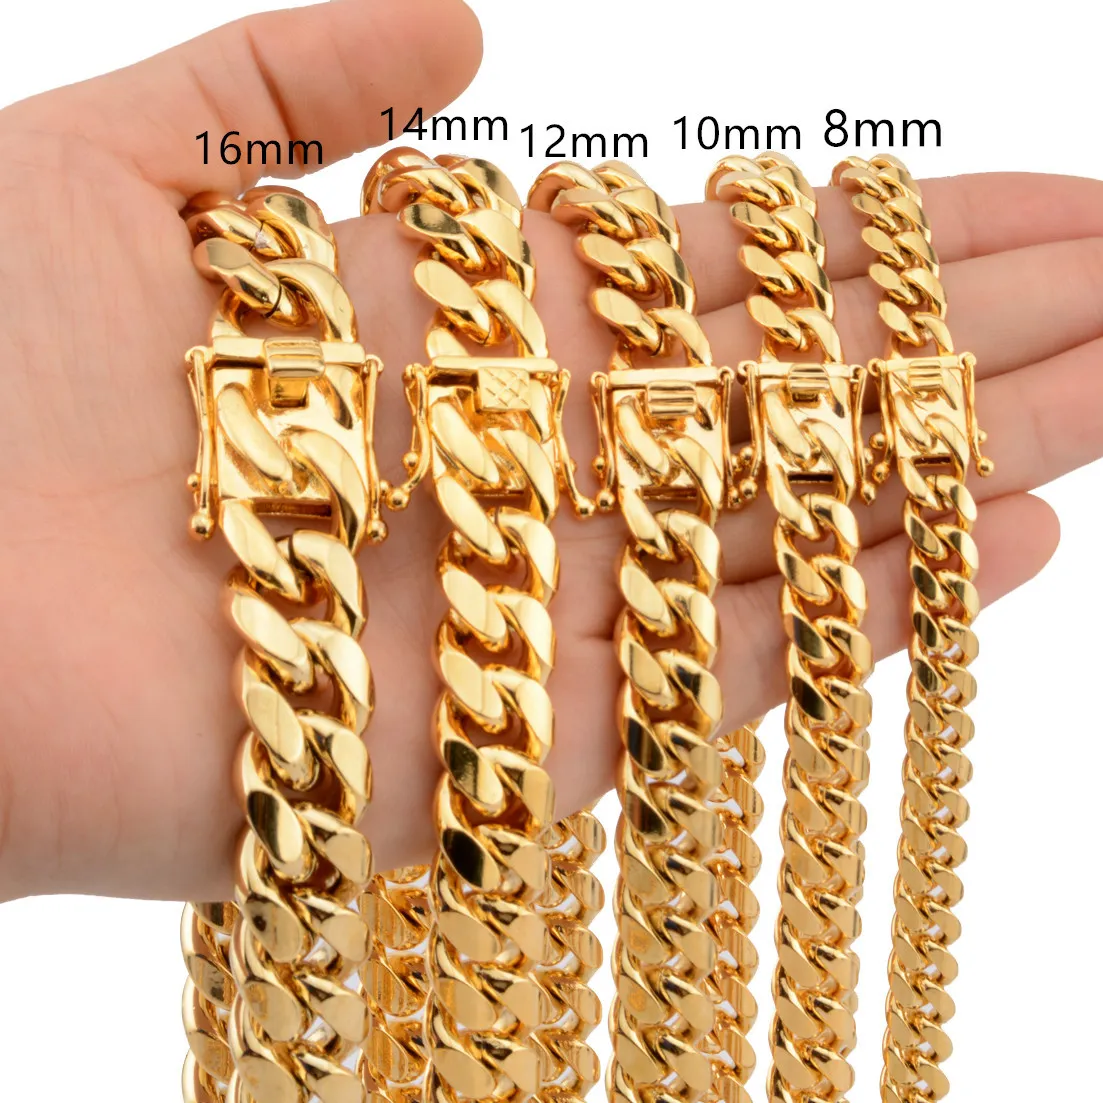 Designer Necklaces Stainless Steel Jewelry Hip Hop Necklace Mens Cuban Link Chain Gold Rapper Accessories Fashion Jewellery 10/12/14/16/18mm